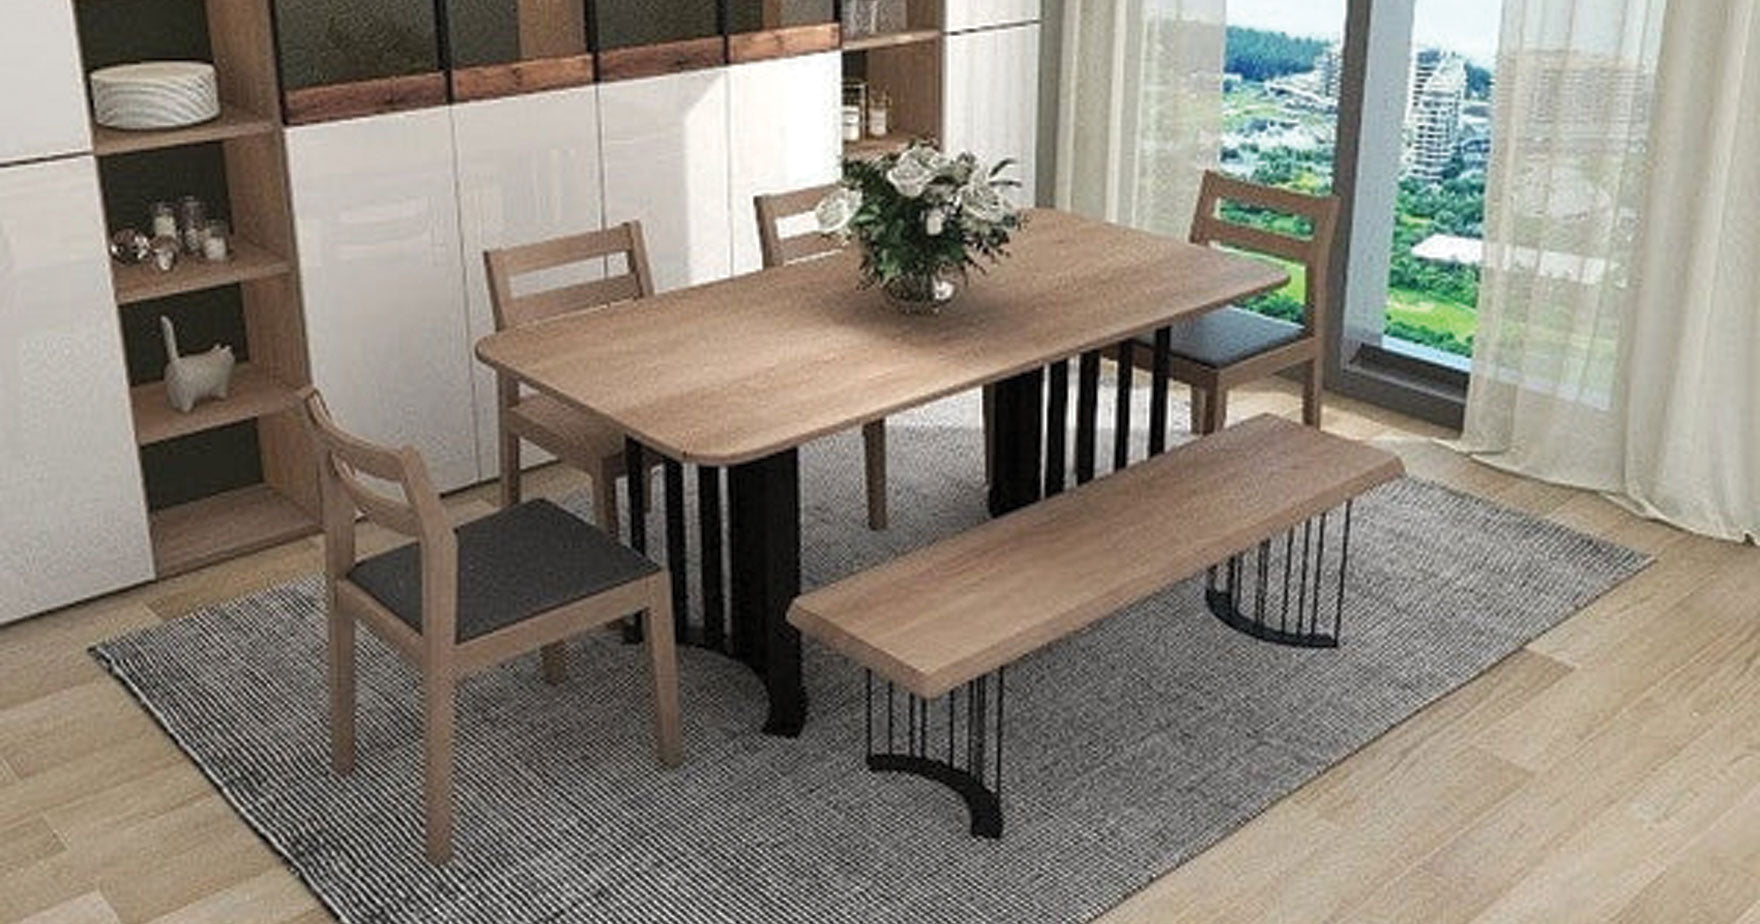 Reasons Why Dining Benches are Becoming Increasingly Popular